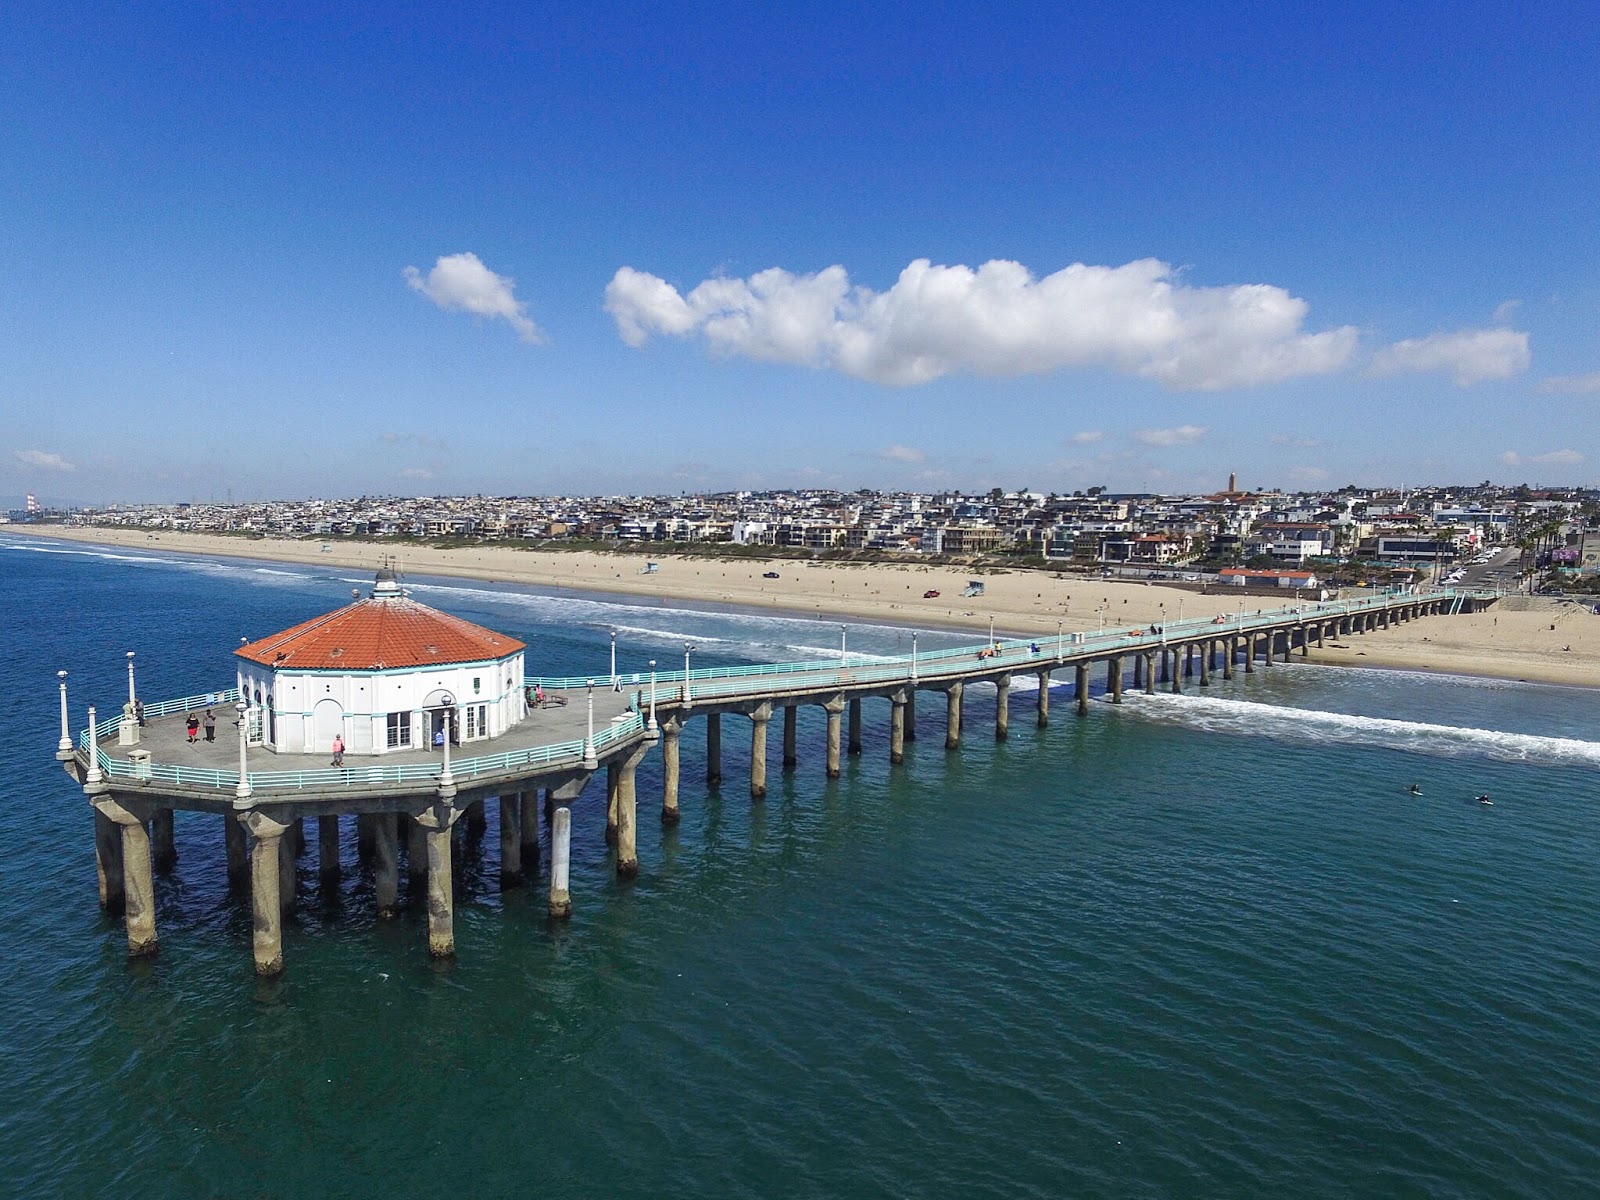 Photo of Hermosa Beach L.A. - popular place among relax connoisseurs